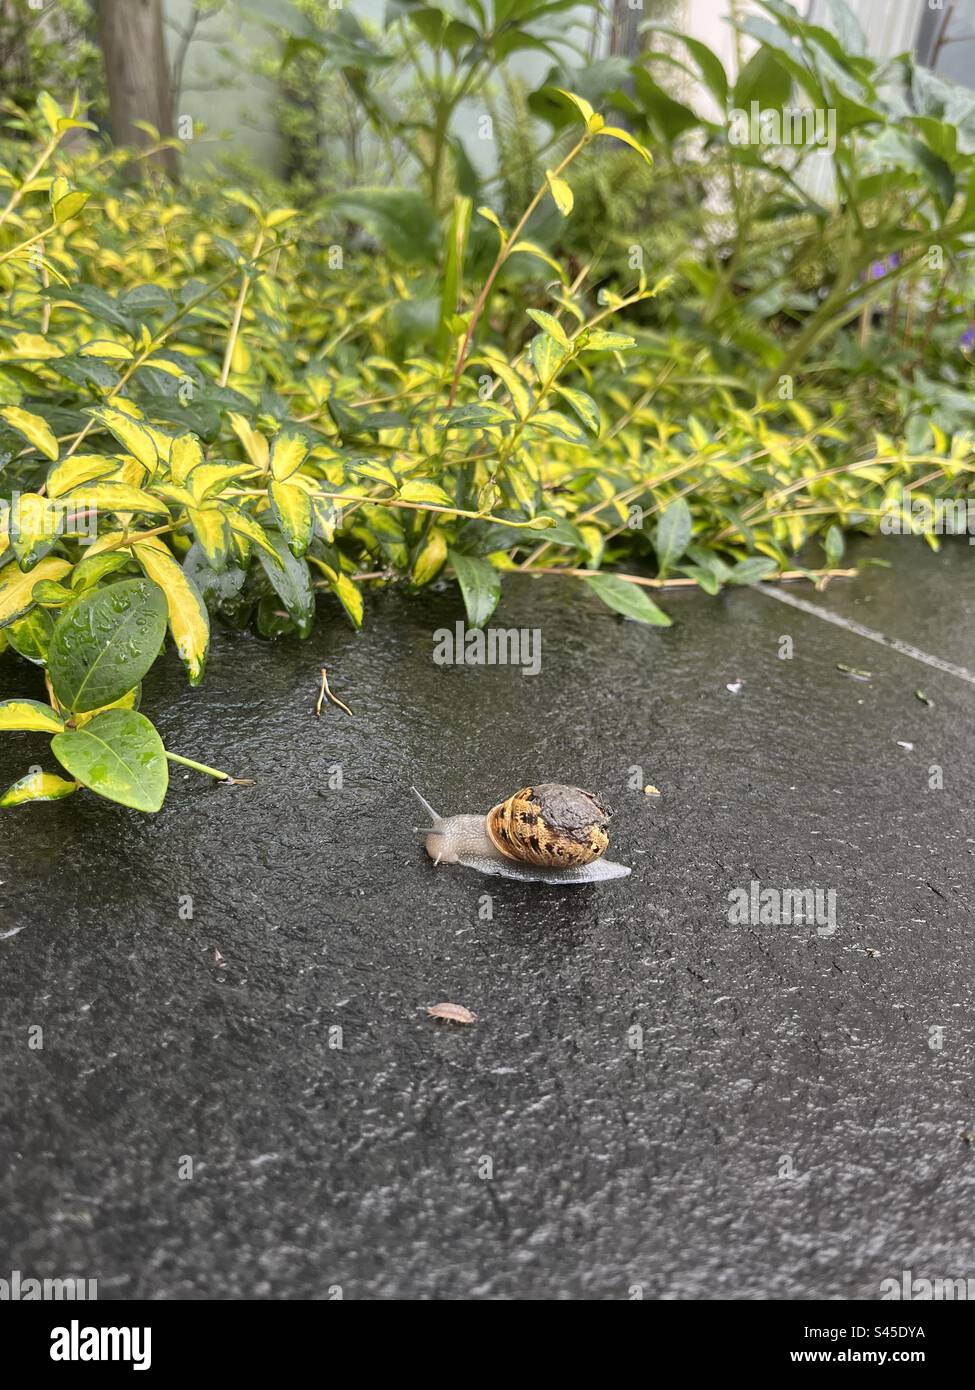 A snail on a monsoon afternoon Stock Photo